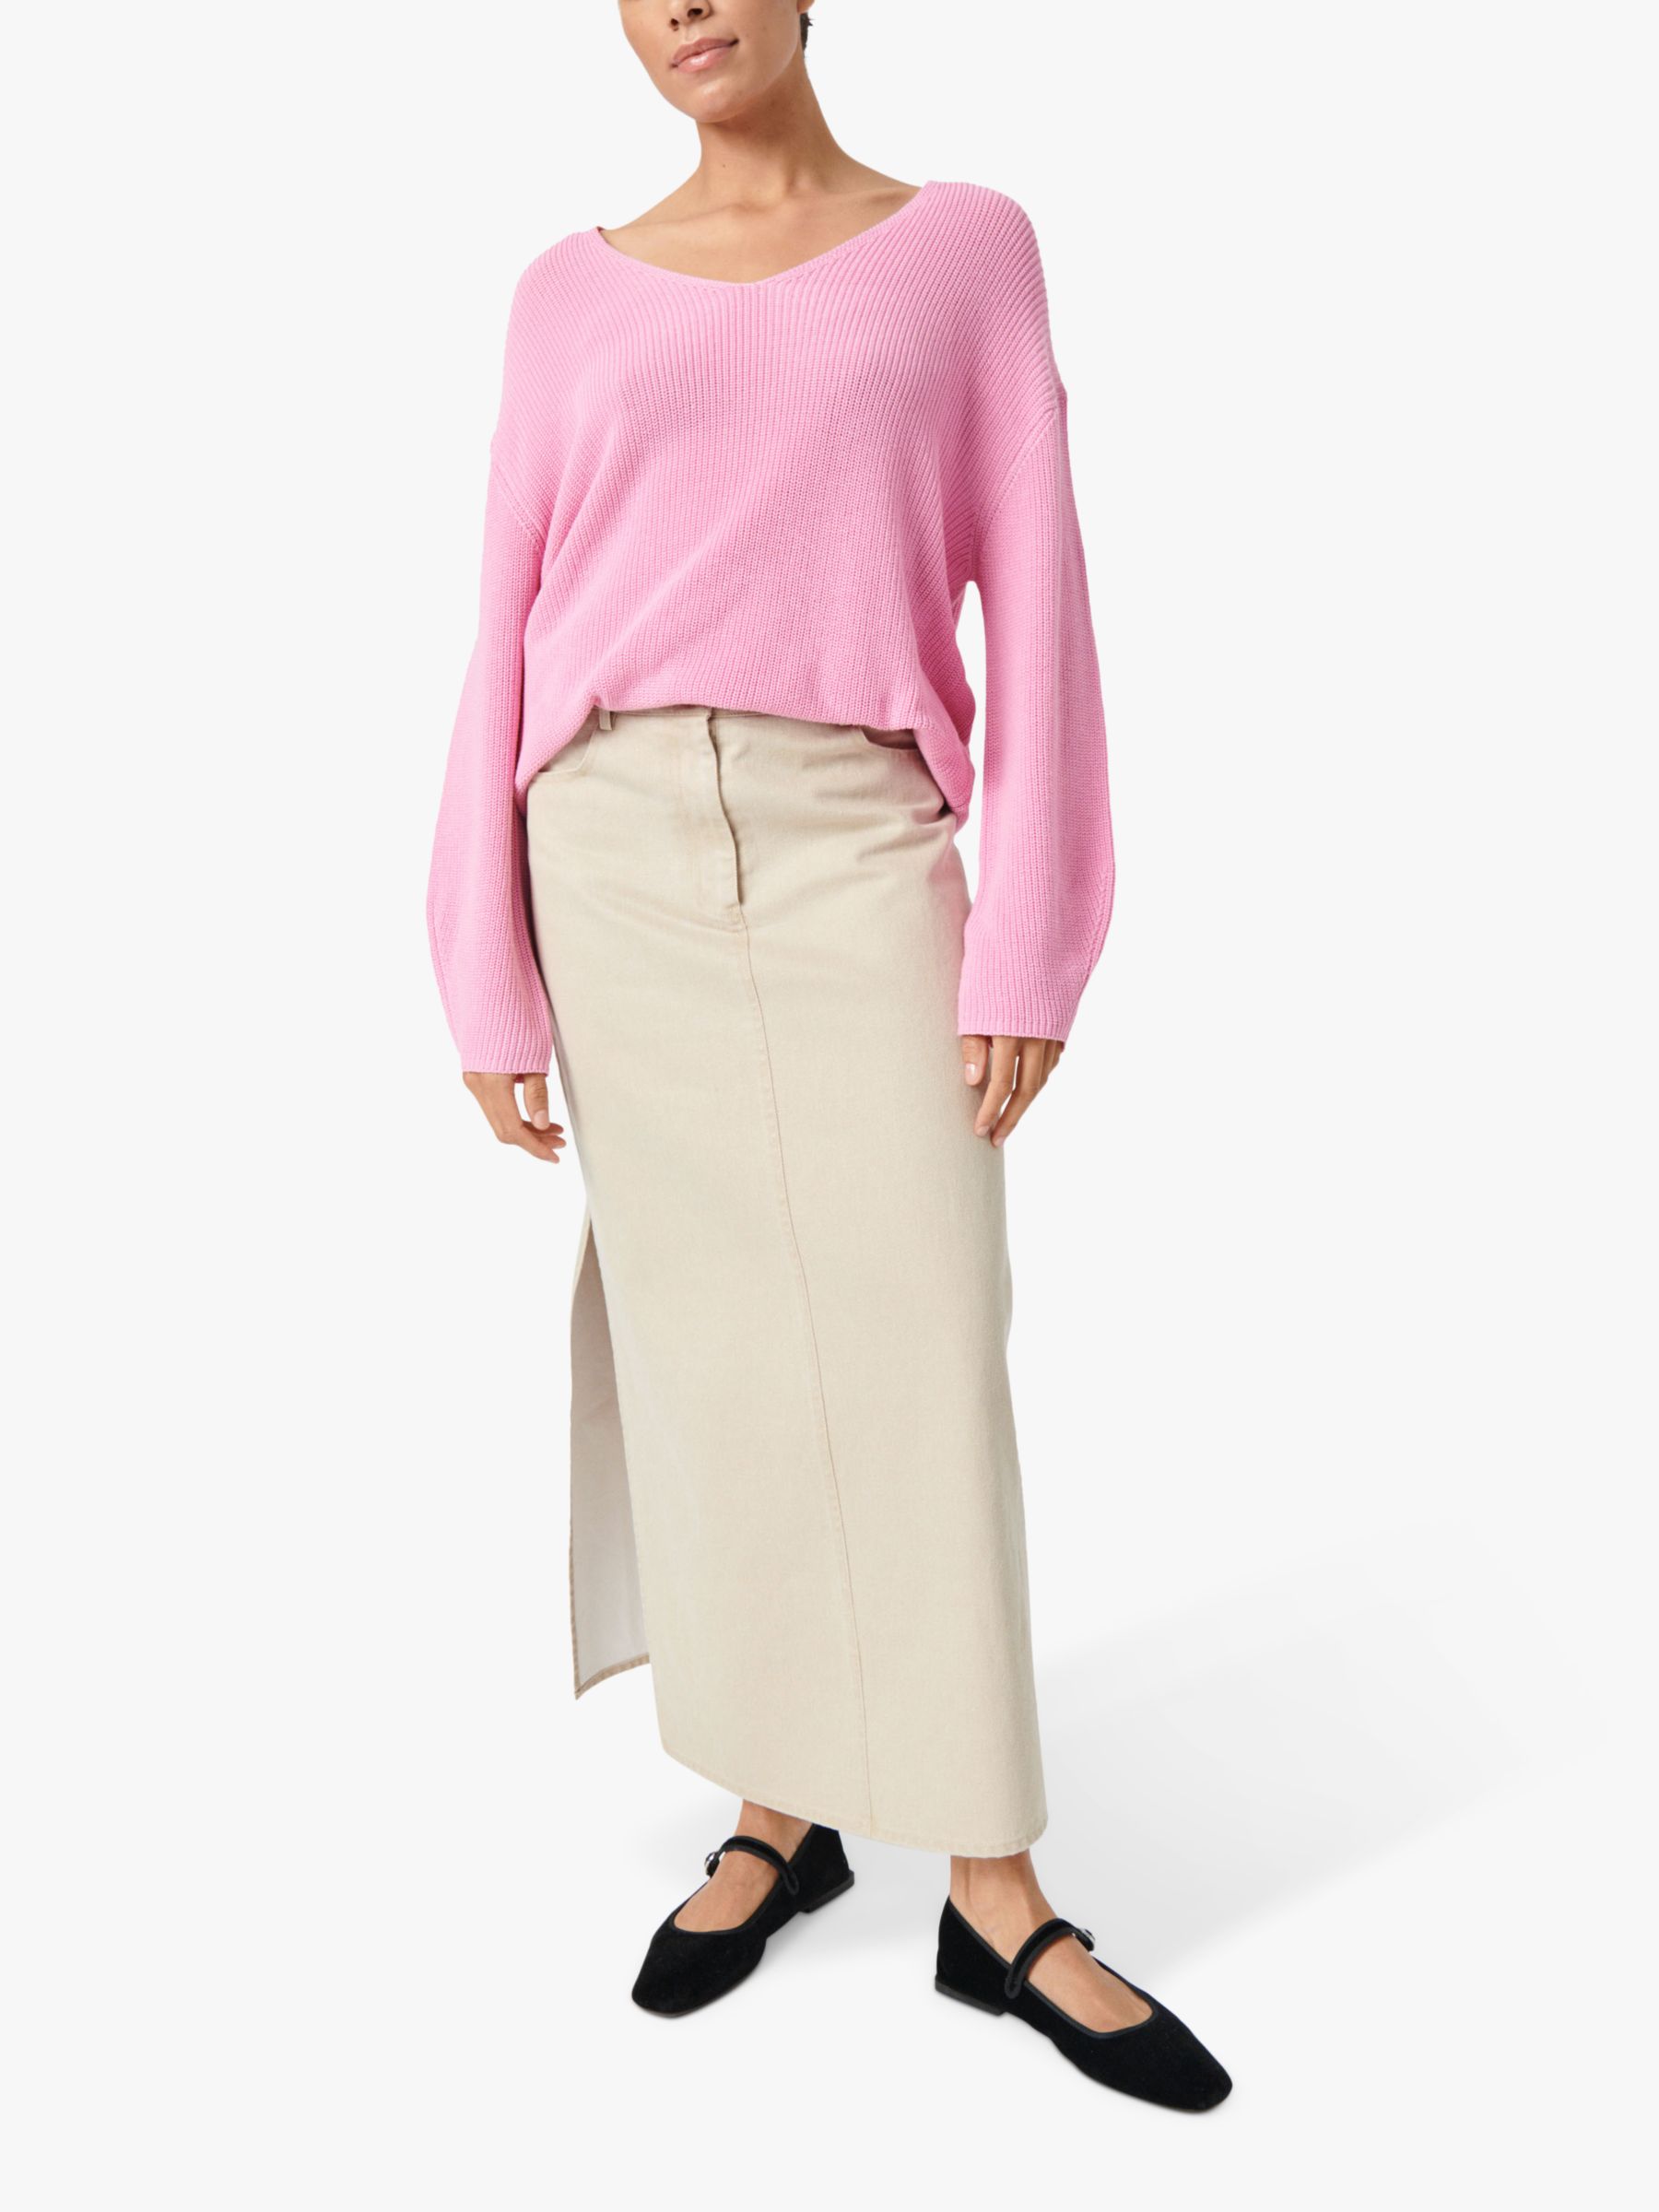 Buy Soaked In Luxury Tuesday V-Neck Relaxed Fit Jumper, Pastel Lavender Online at johnlewis.com